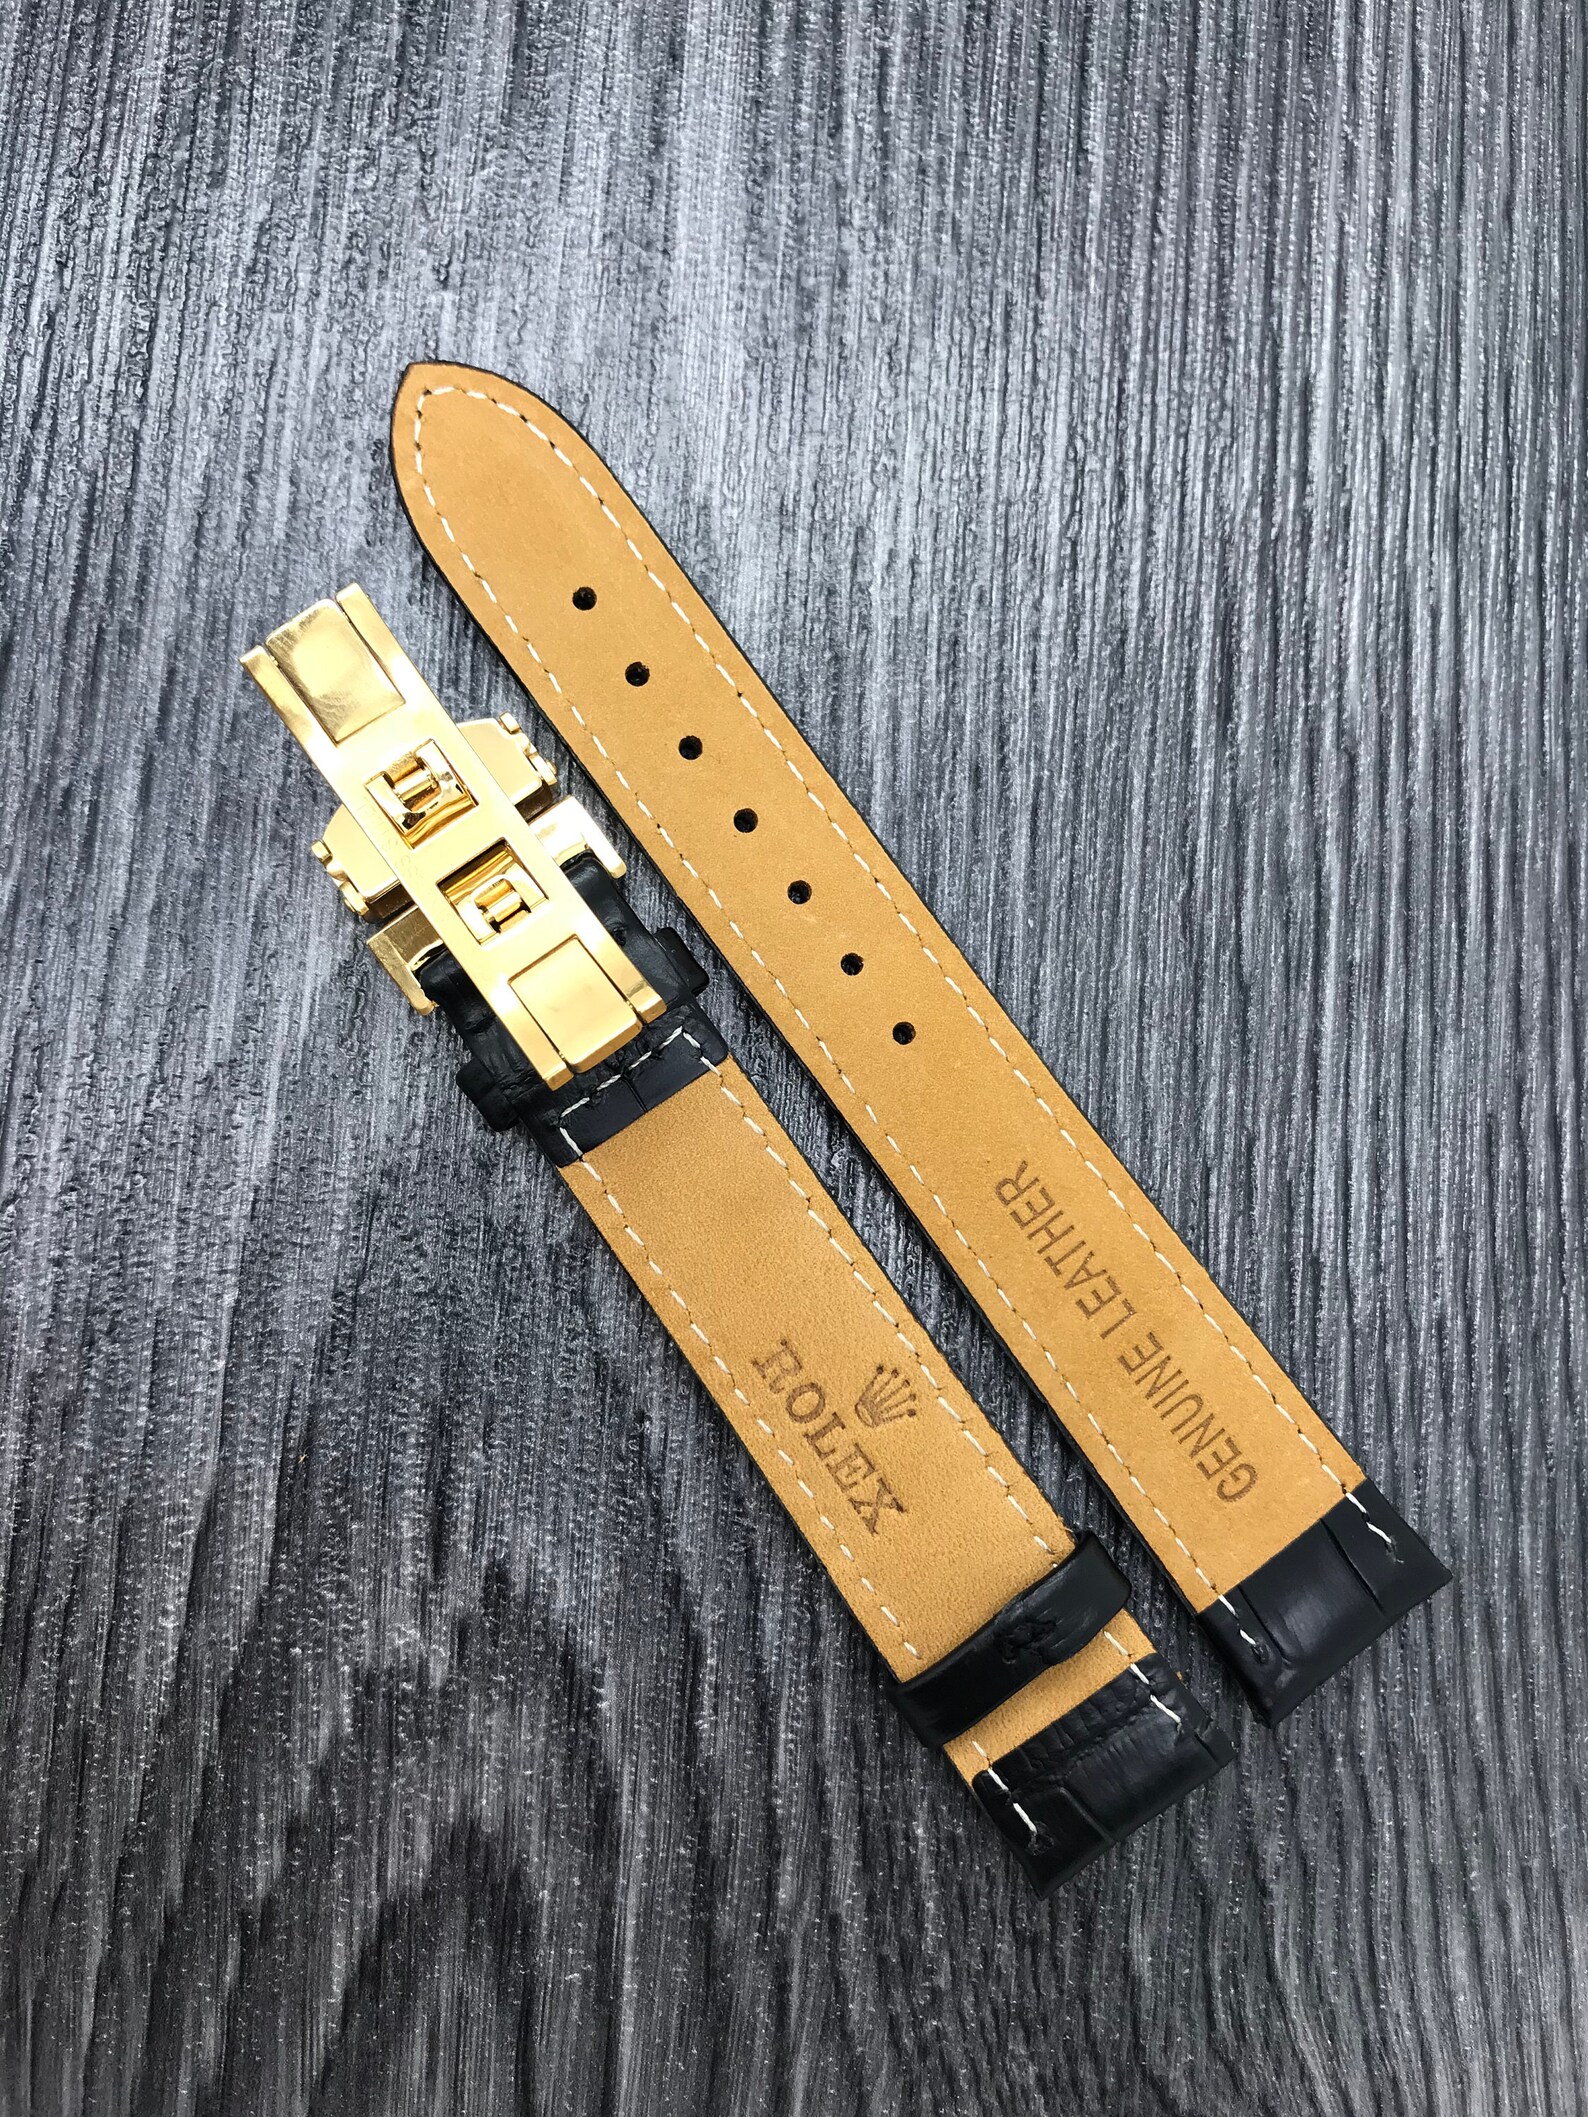 New Rolex 18mm Genuine Leather Strap with Buckle for Rolex | Etsy